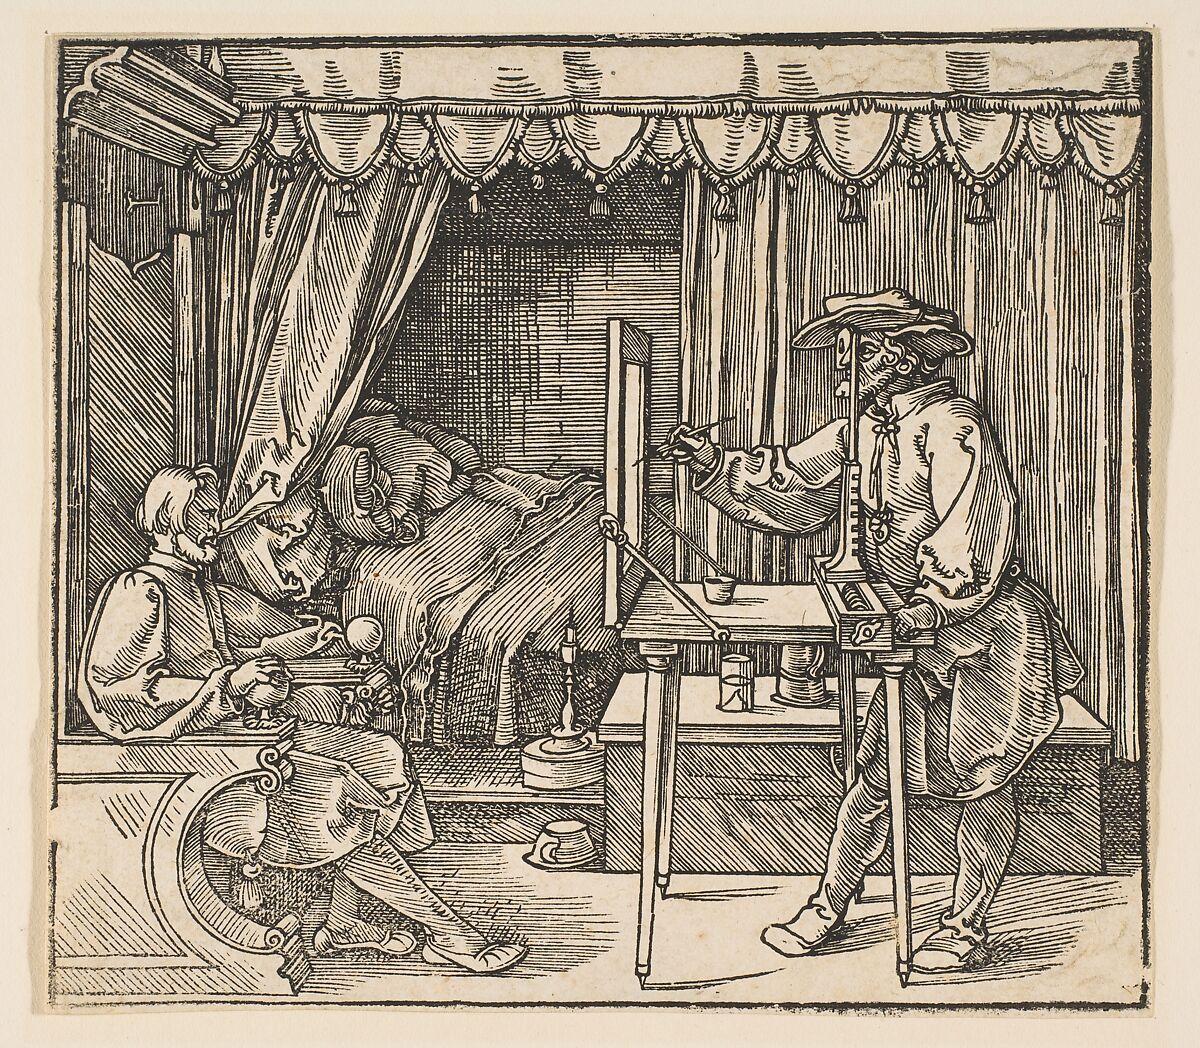 Renaissance woodcut print of an artist using a wooden frame to paint a man seated in an ornate chair